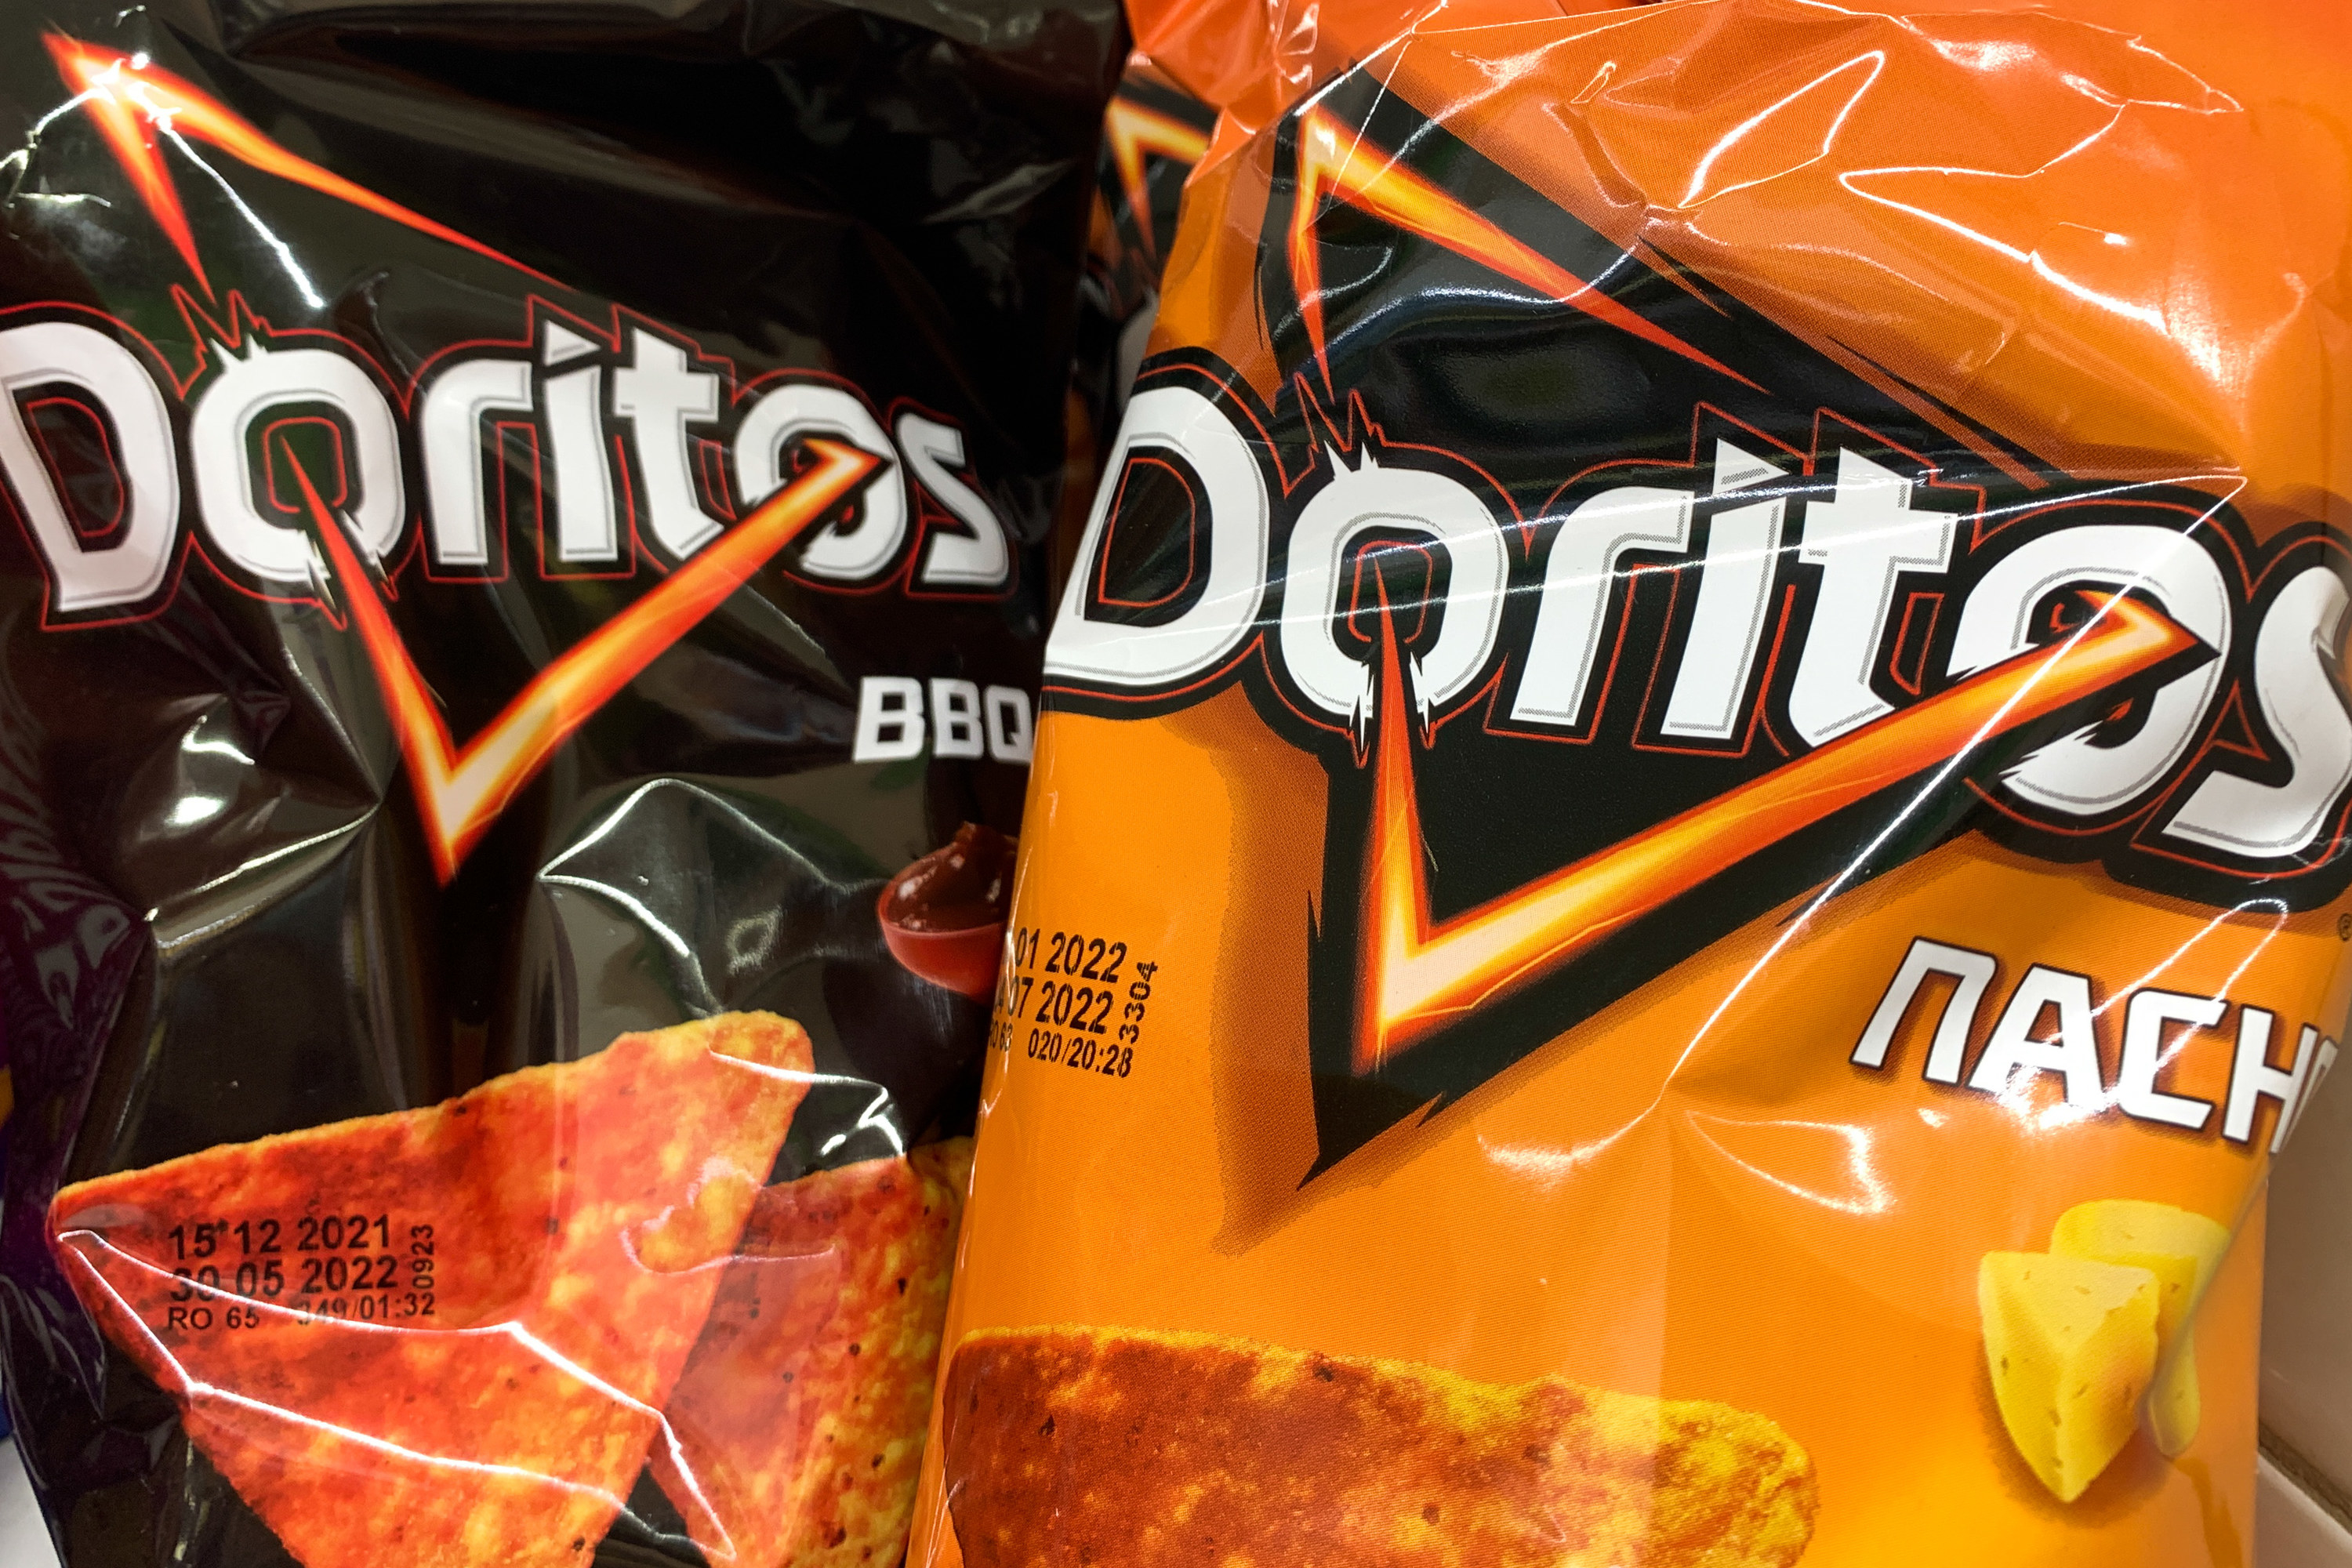 Two bags of Doritos flavors: BBQ and Nacho